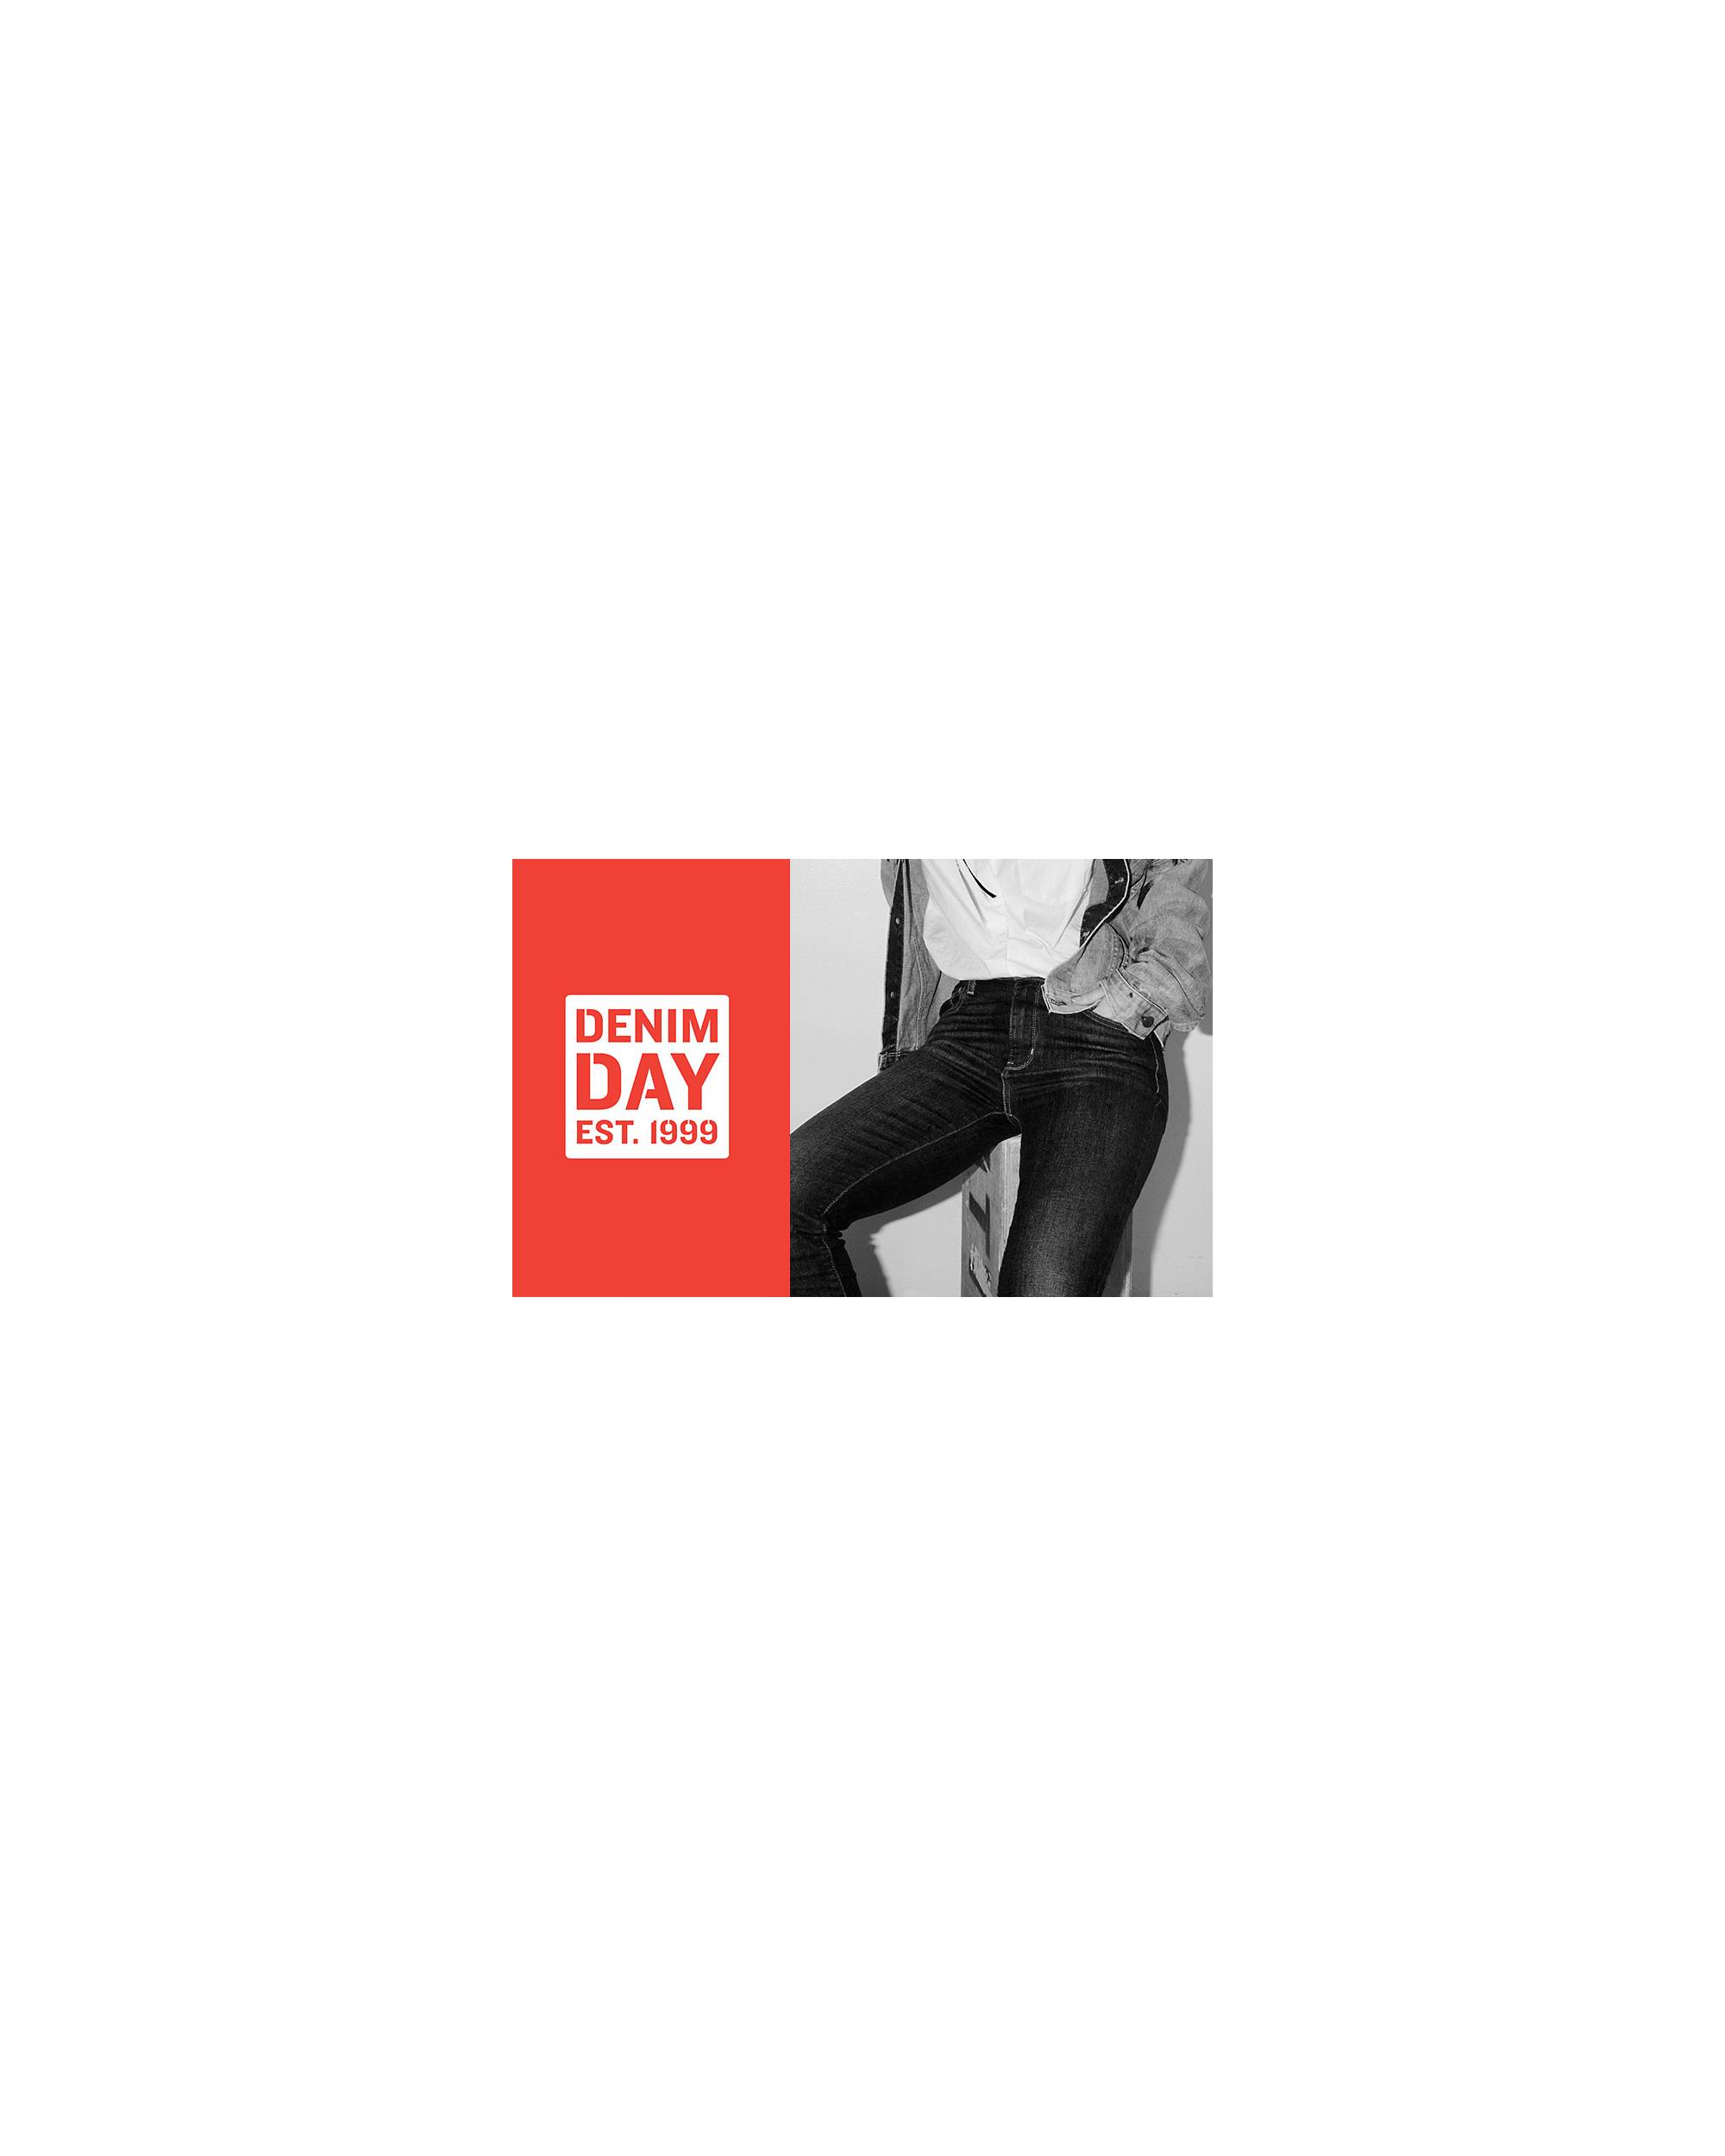 Denim Day white logo on red next to black & white photo of woman in skinny jeans